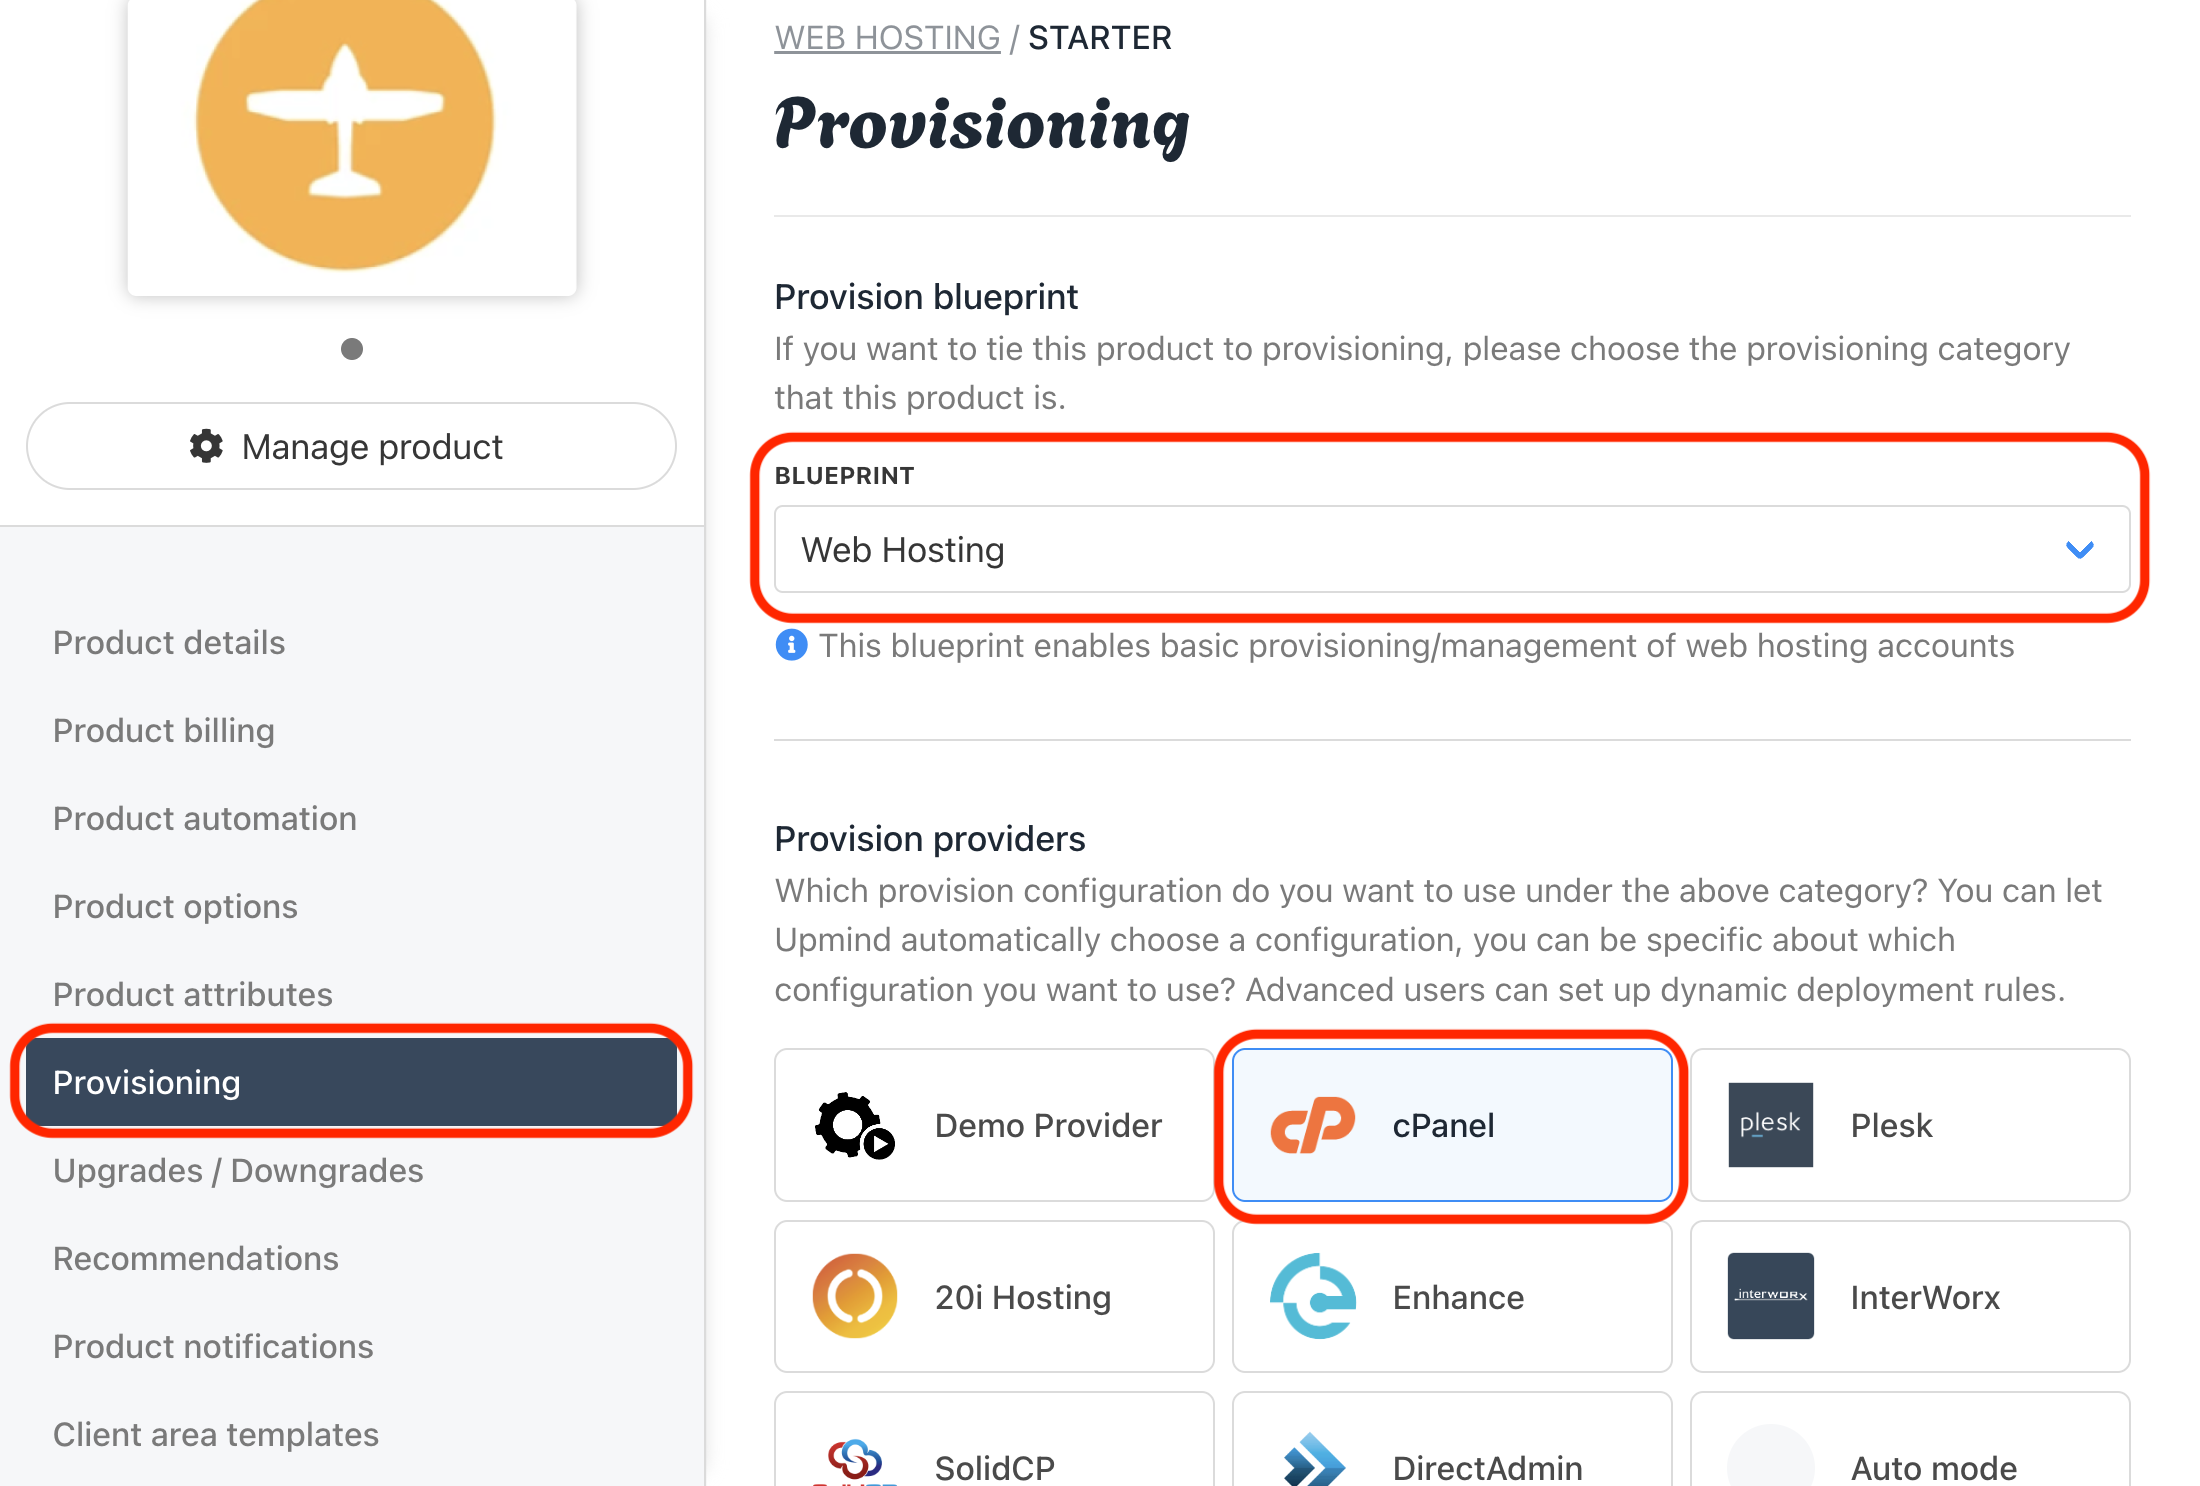 Provisioning under Product